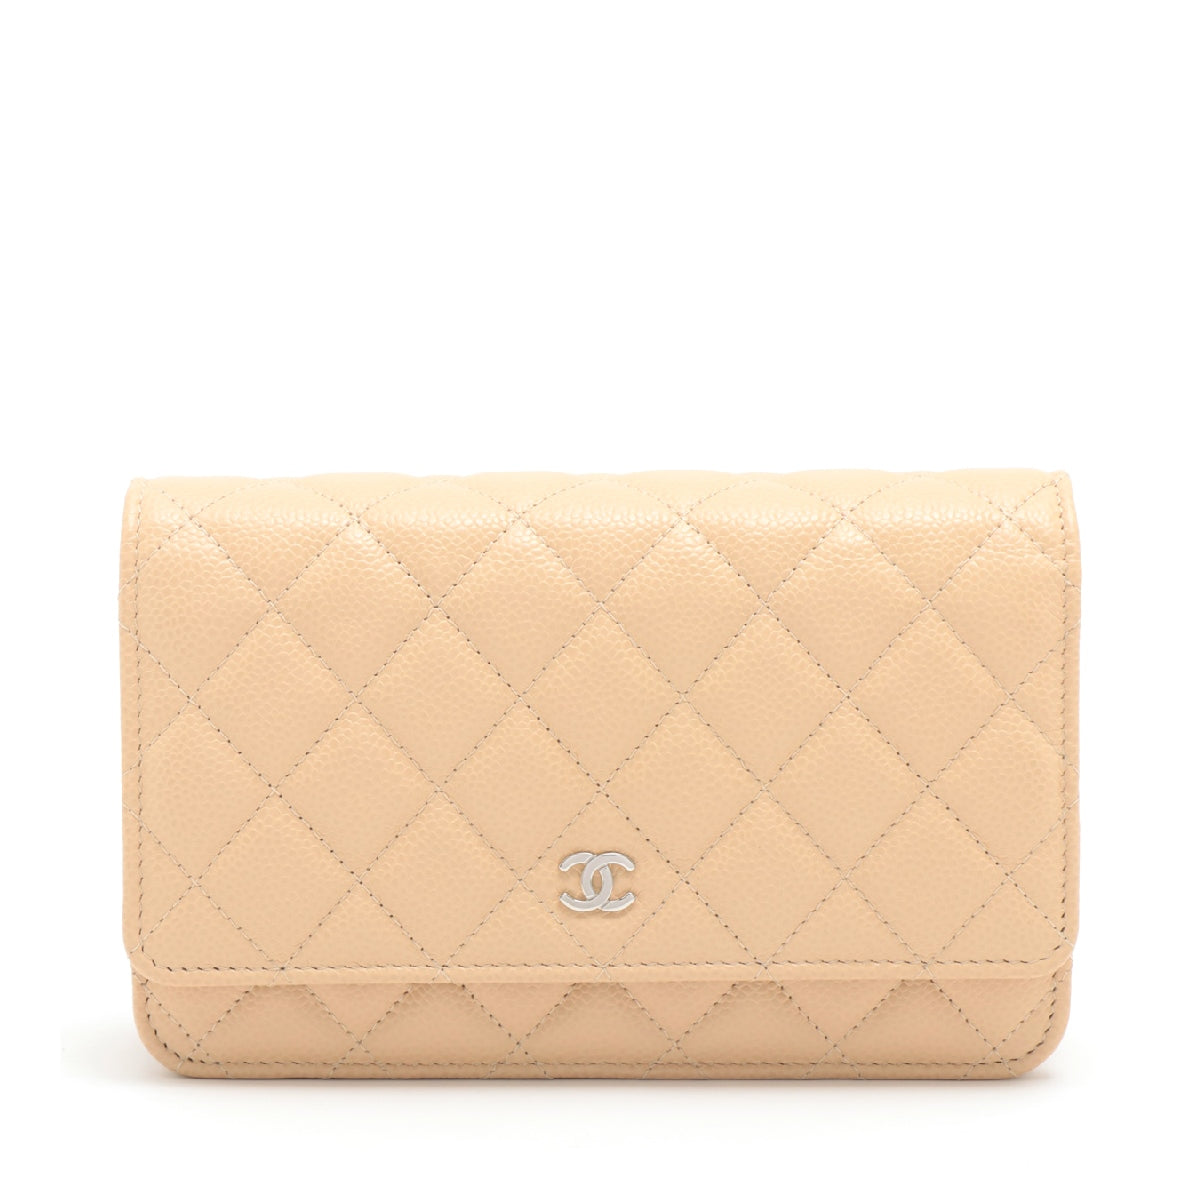 Chanel Matelasse Caviarskin Chain wallet Beige Silver Metal fittings There is an IC chip